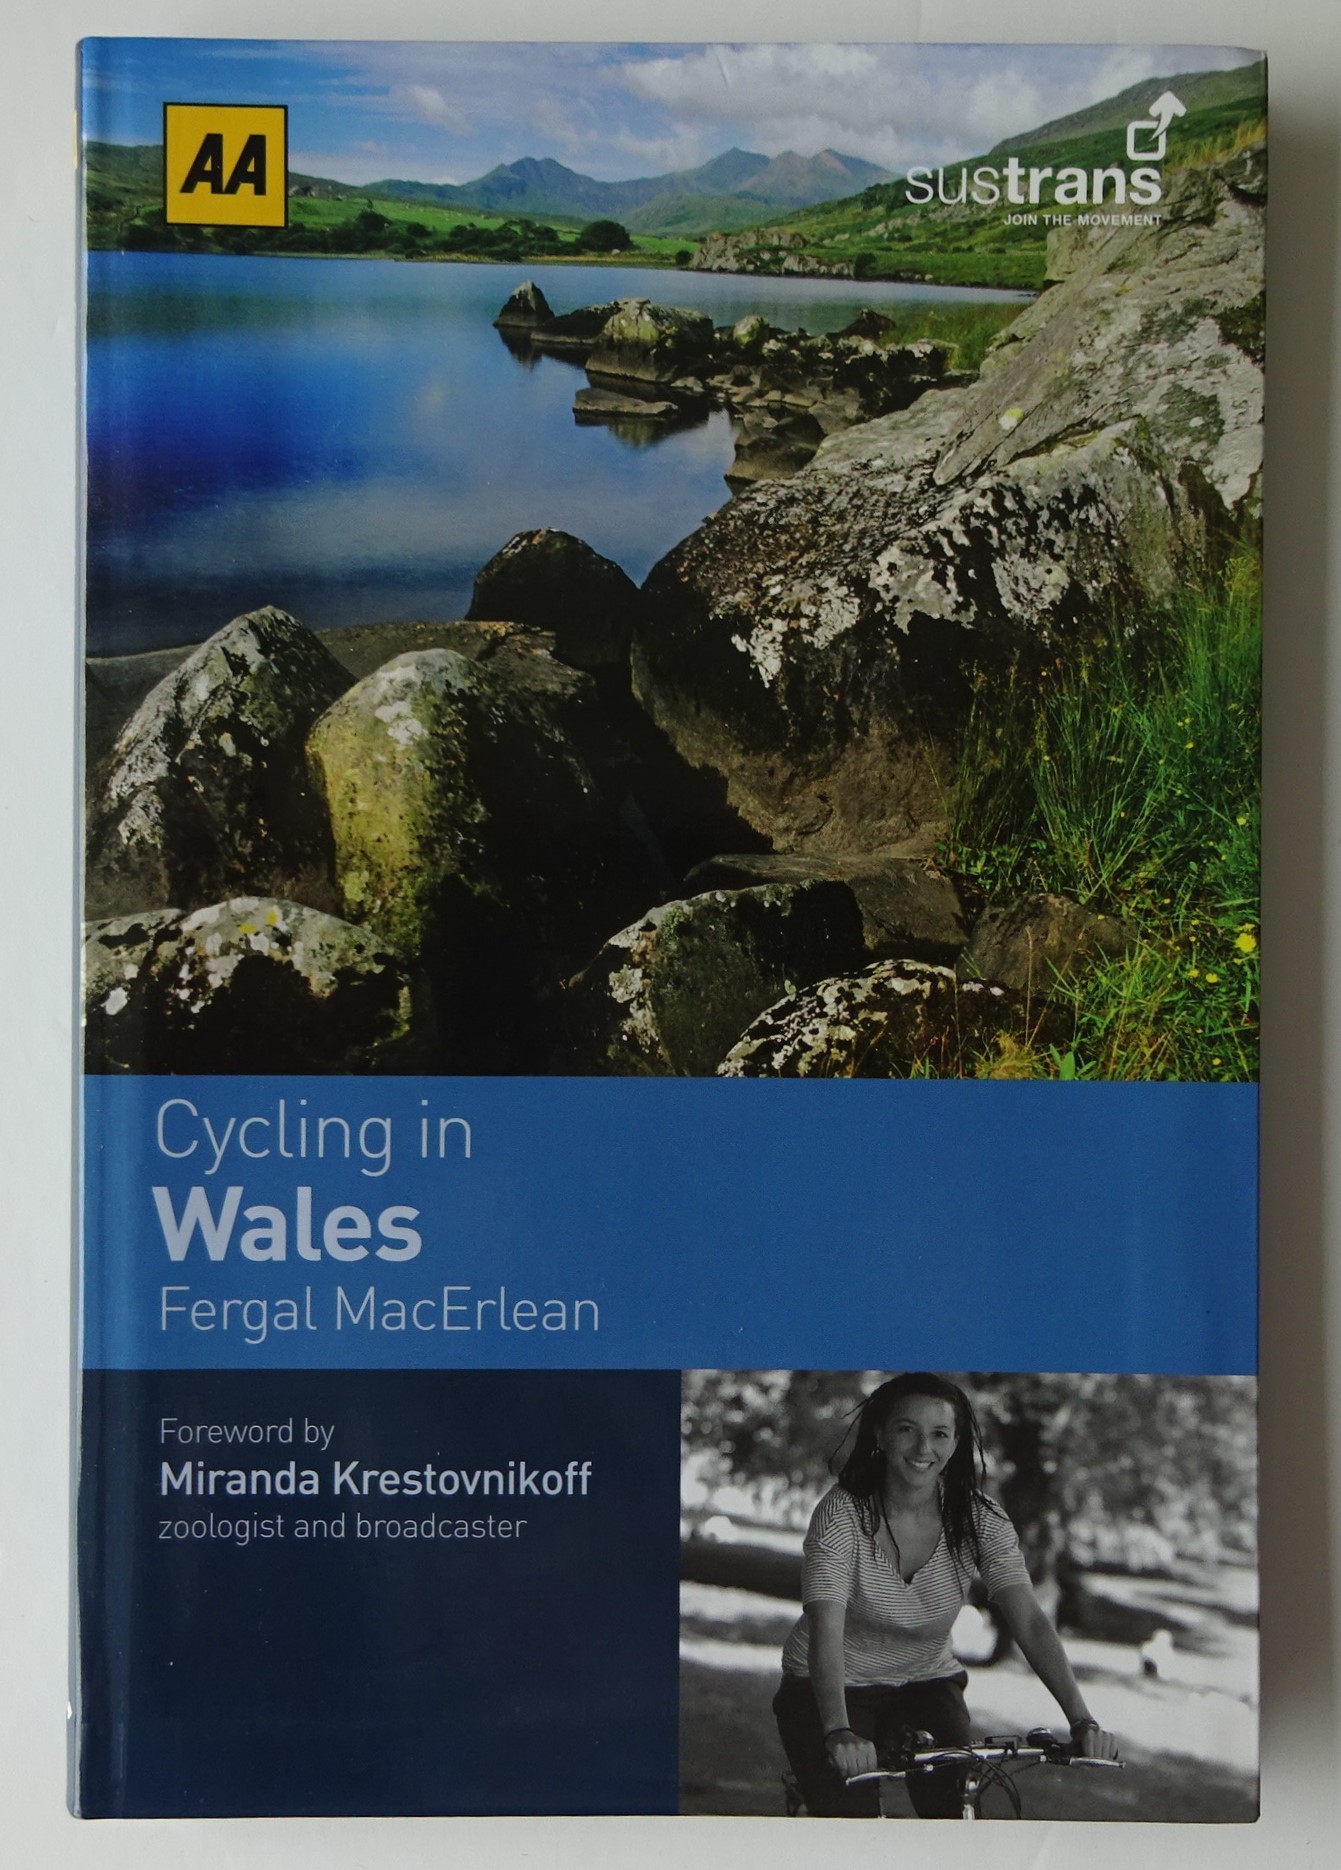 Cycling in Wales AA guide book